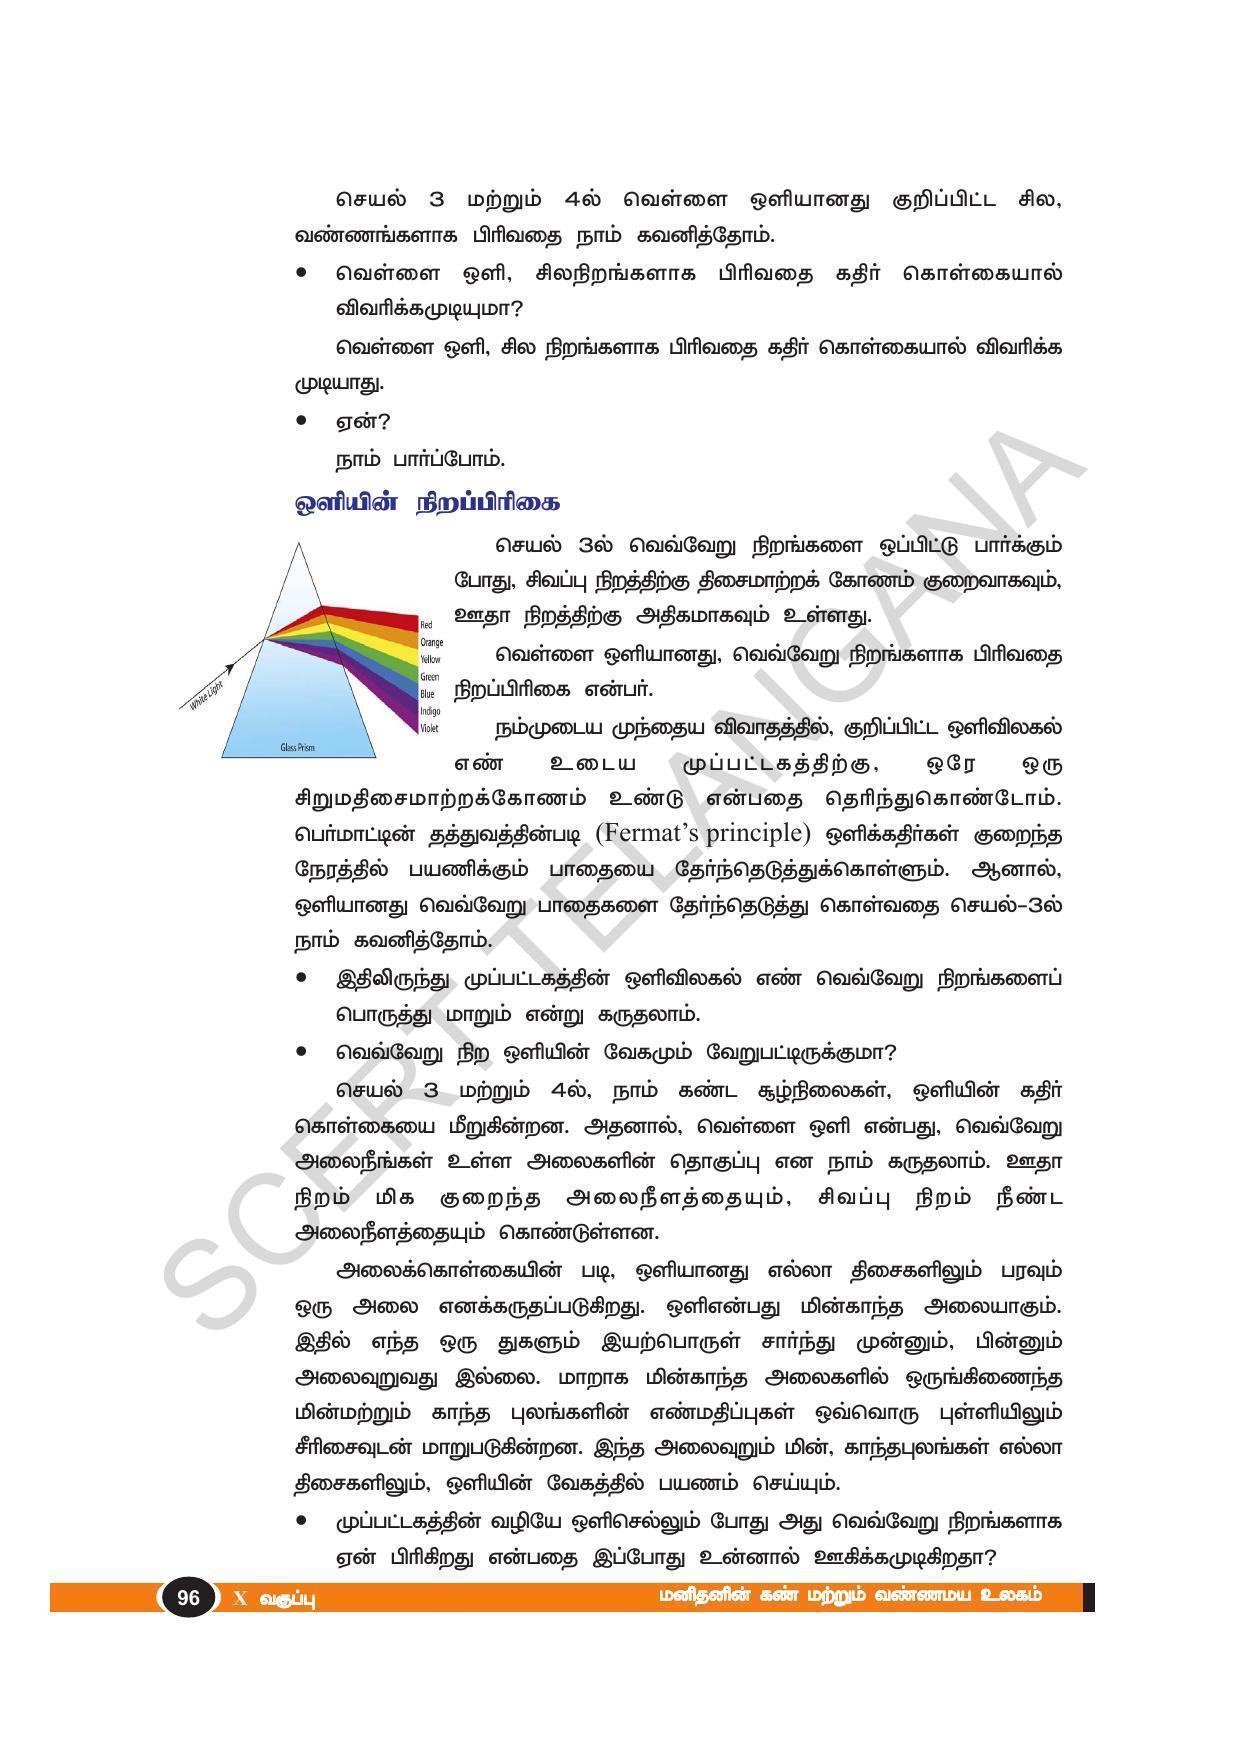 TS SCERT Class 10 Physical Science(Tamil Medium) Text Book - Page 108